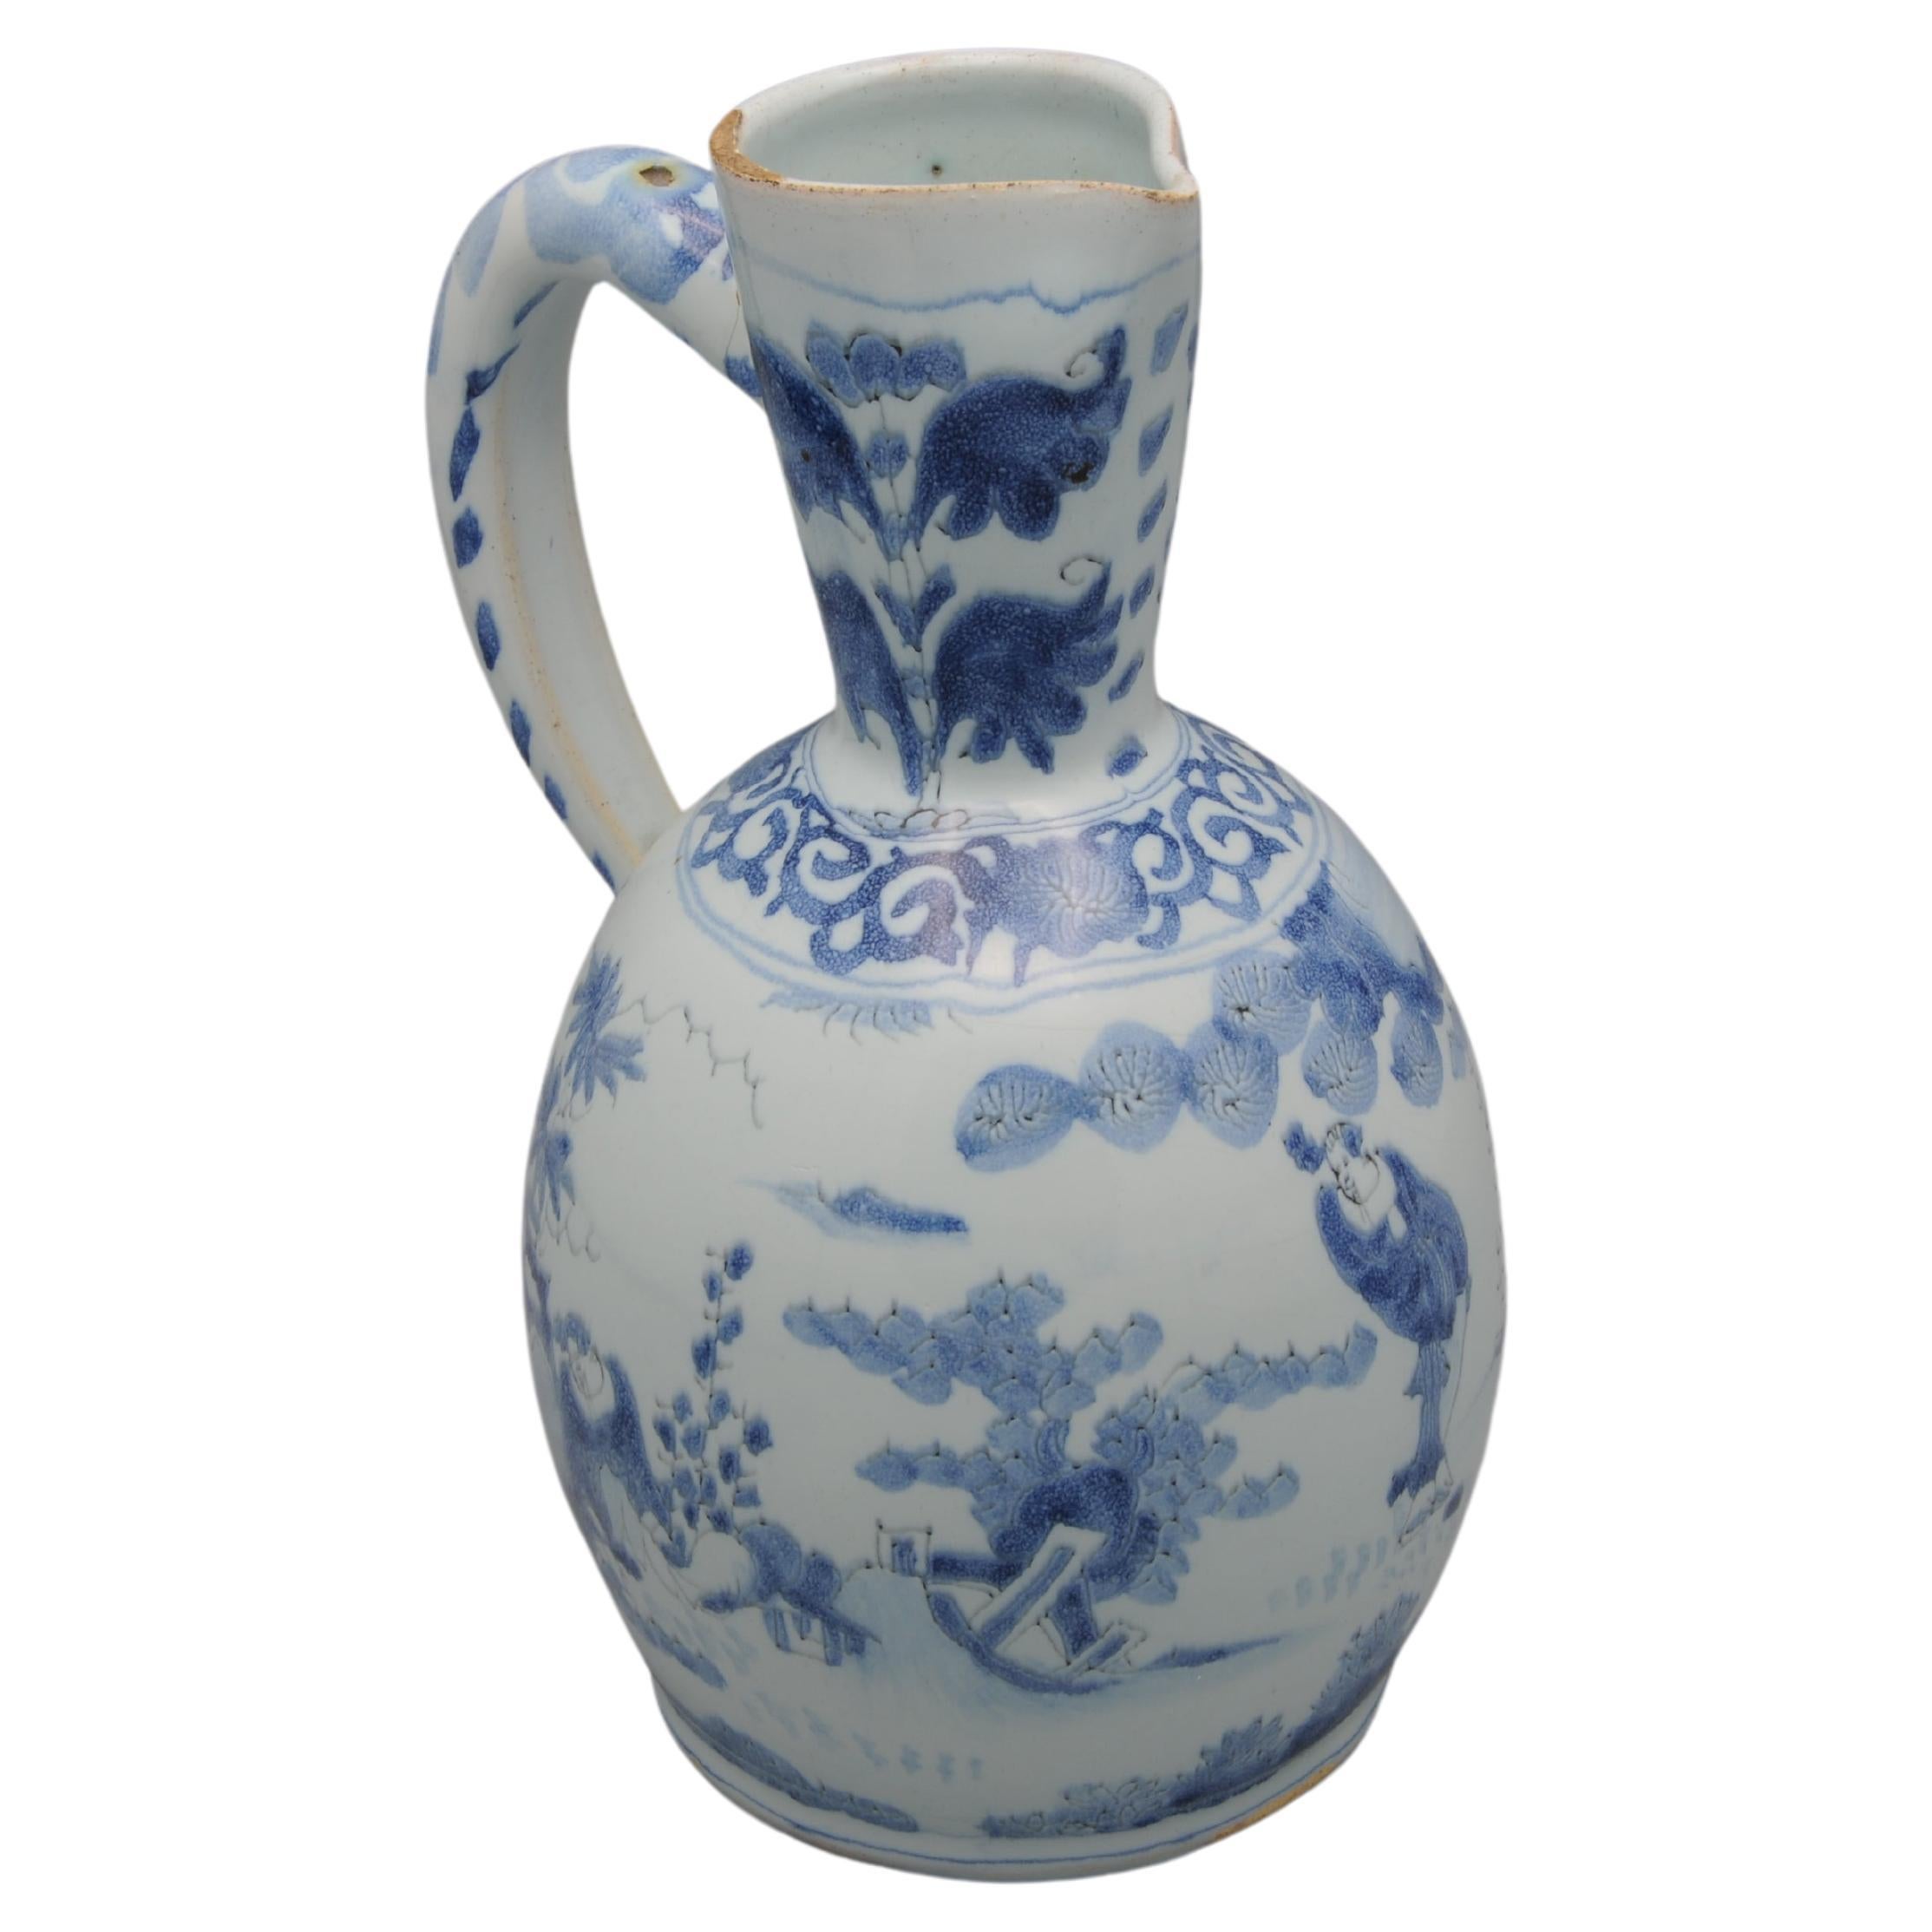 Dutch Delftware pouring jug with soft blue decoration of a chinoiserie landscape with persons. The neck with two stylised flowers above a lambrequin border at the neck, the handle with a scrollwork pattern
With later pewter lid and foot rim.